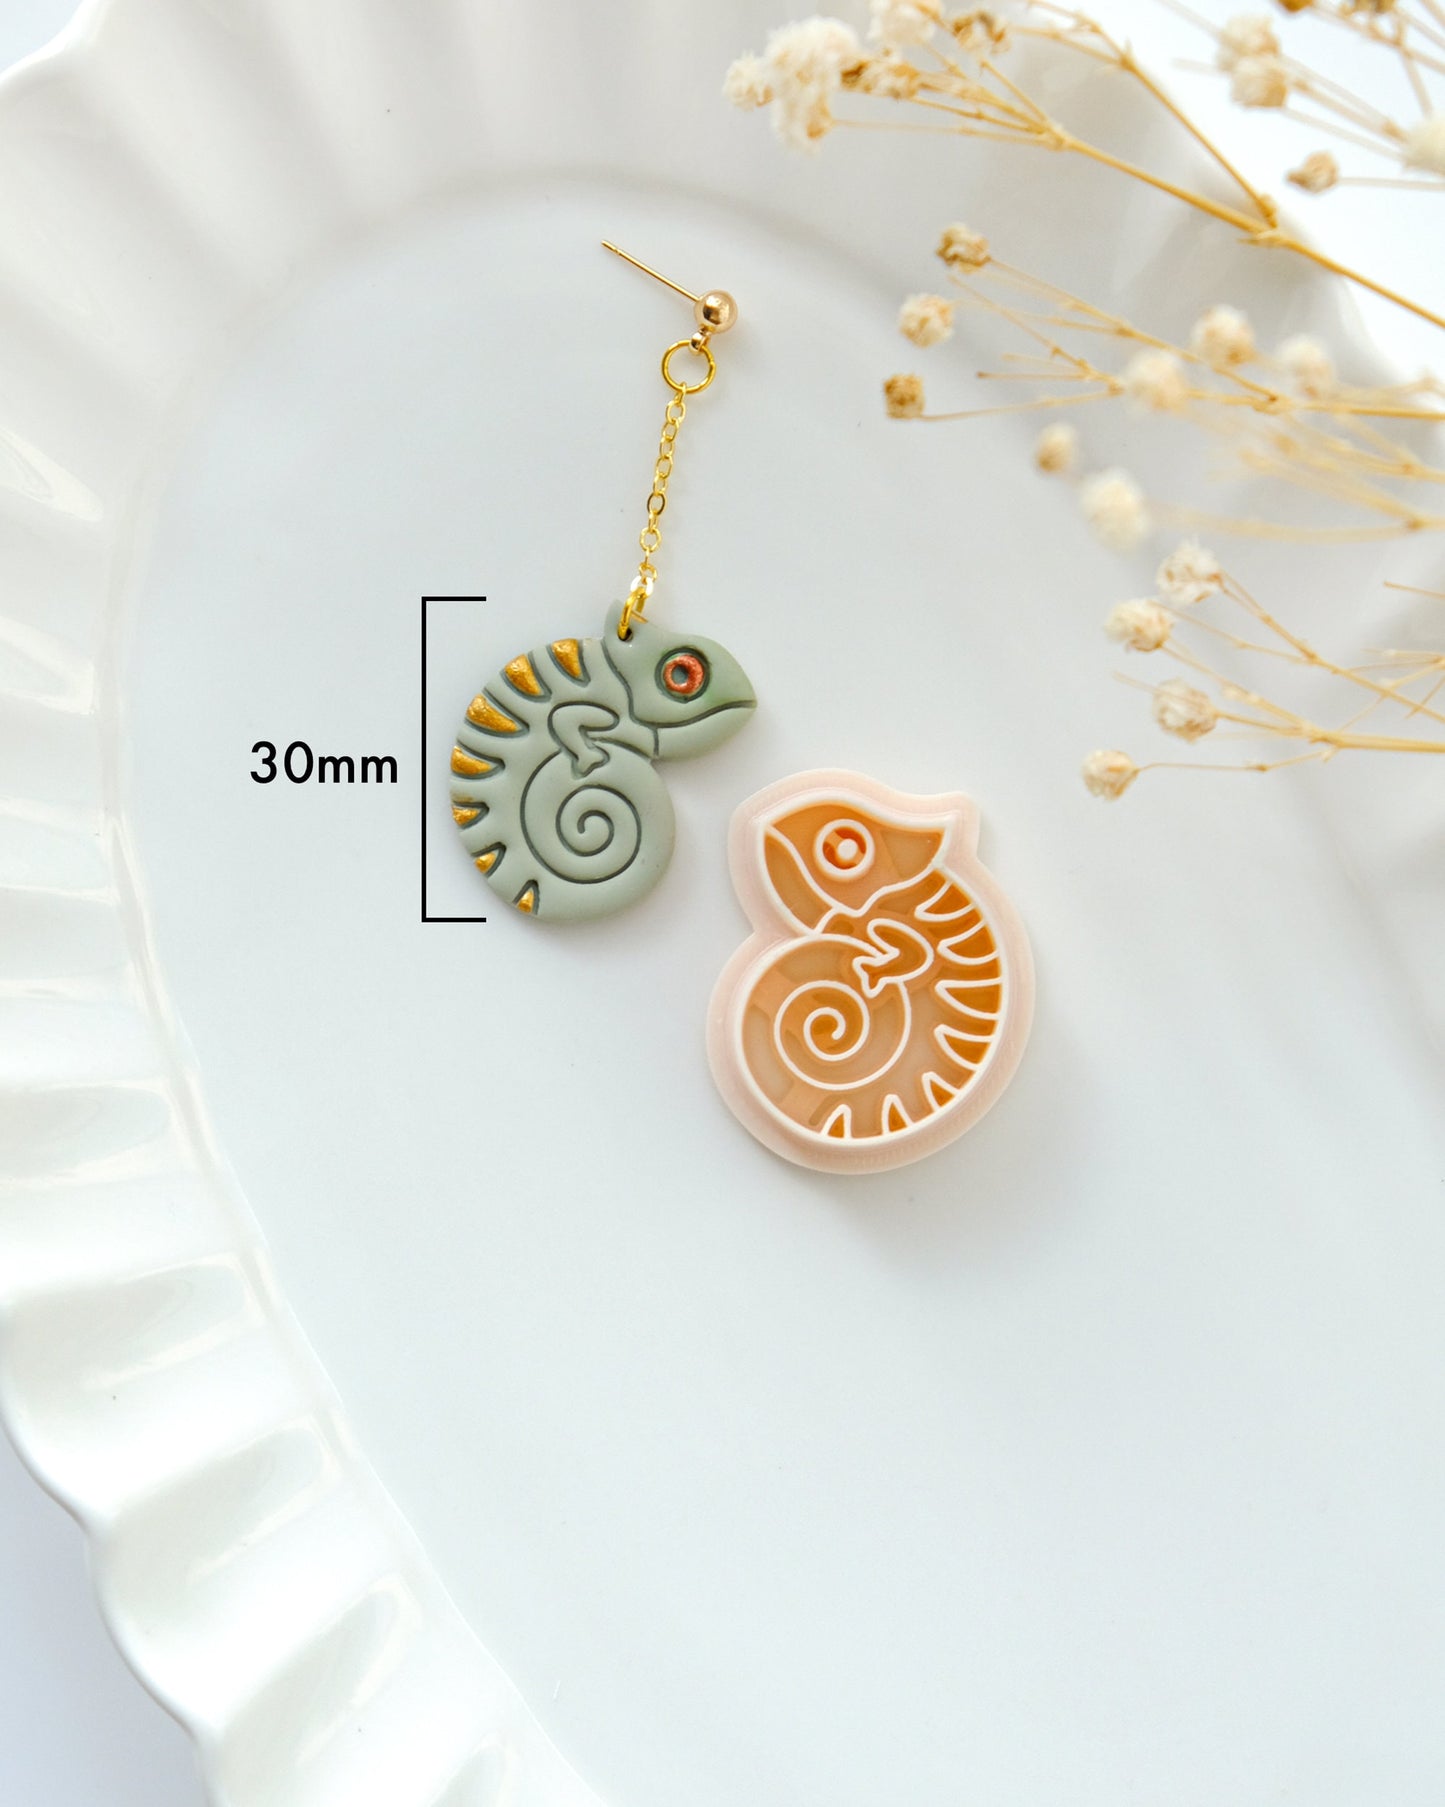 Chameleon Polymer Clay Cutters | Summer Animal Clay Earring Cutters